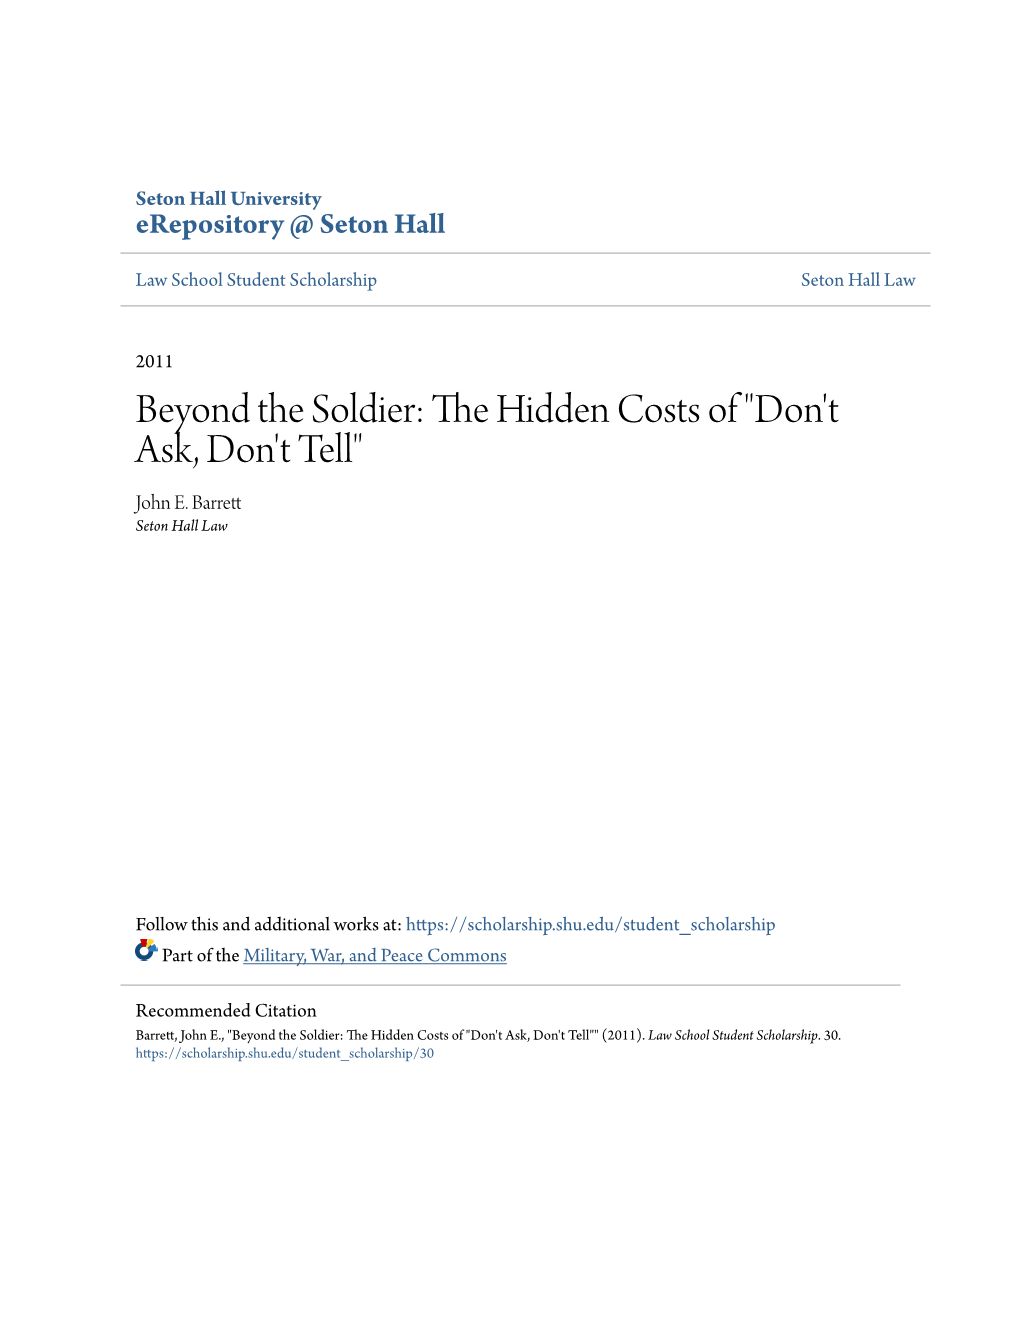 Beyond the Soldier: the Hidden Costs of “Don’T Ask, Don’T Tell”